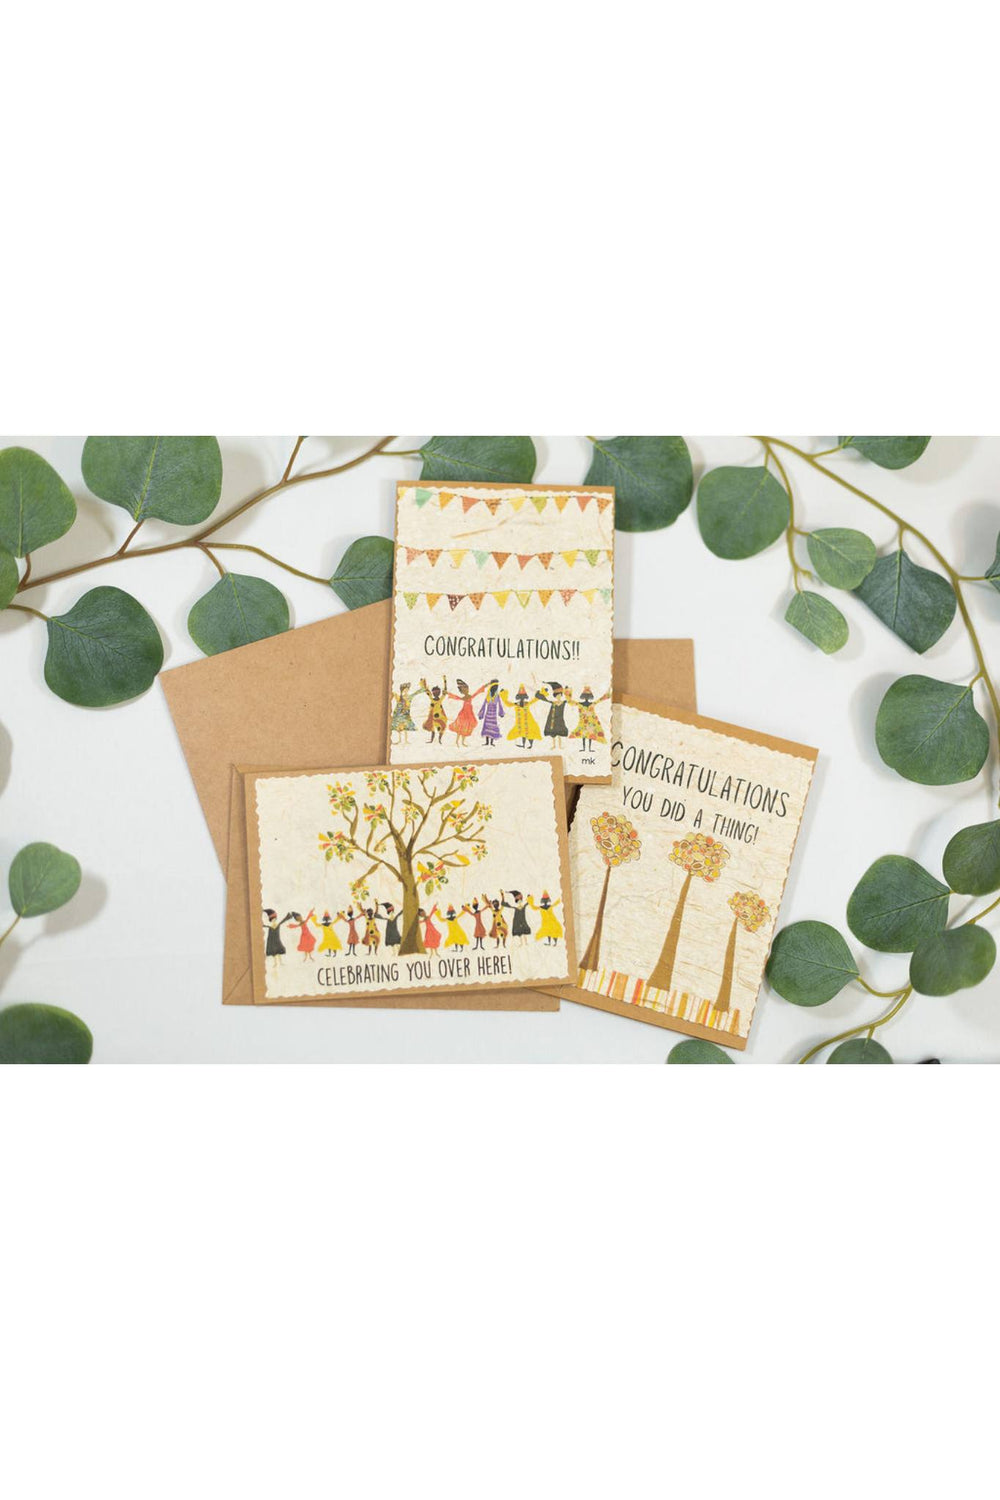 Banana Paper Congratulations Cards by 2nd Story Goods